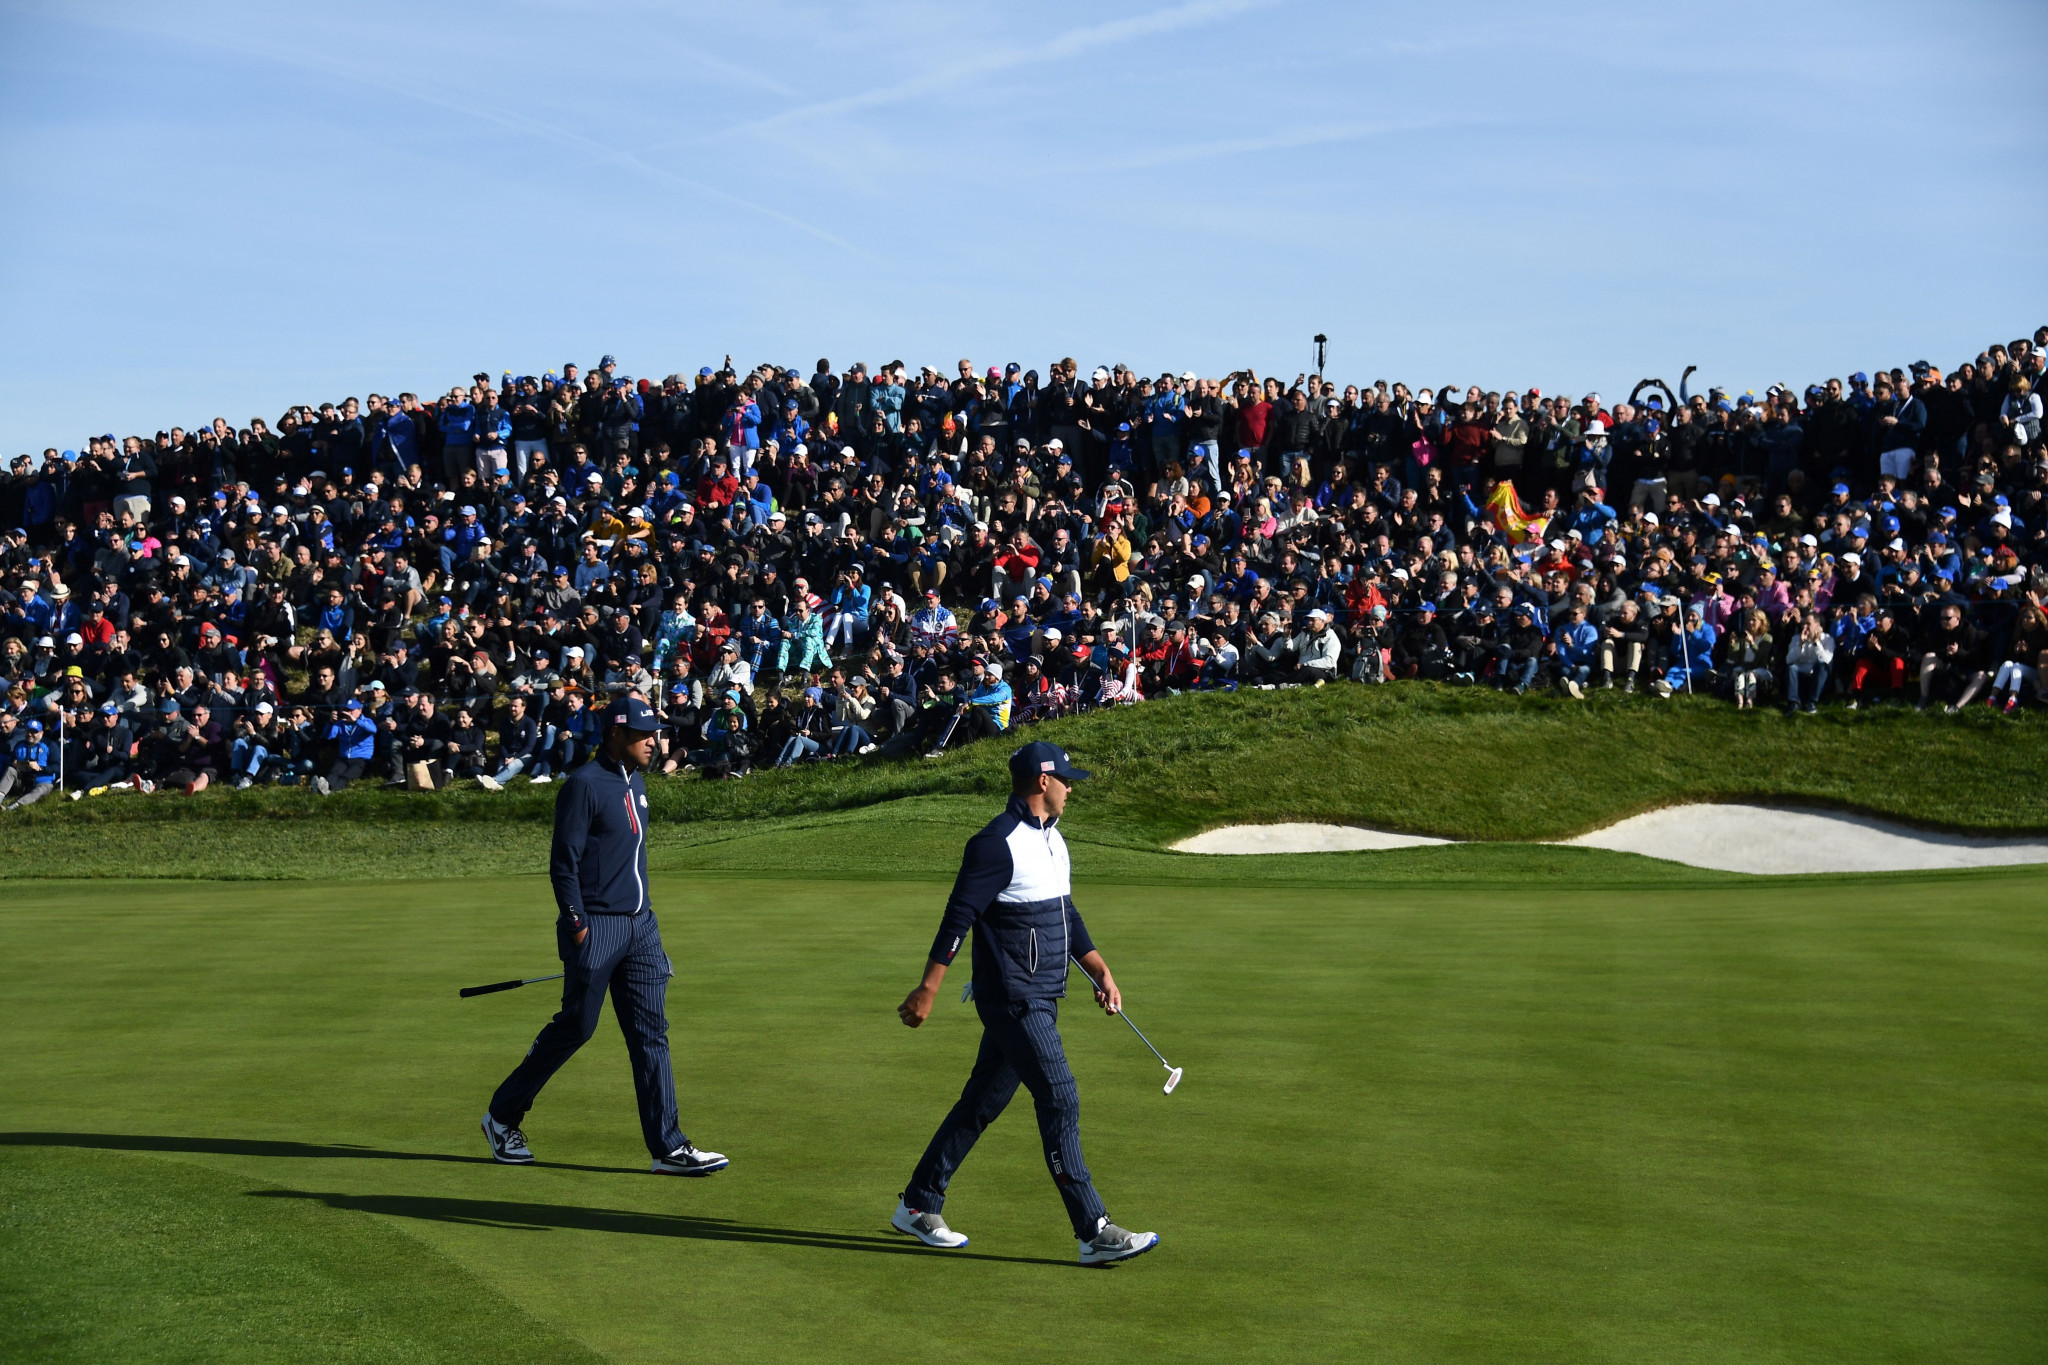 France receives €235 million economic benefit from staging Ryder Cup in boost for Paris 2024